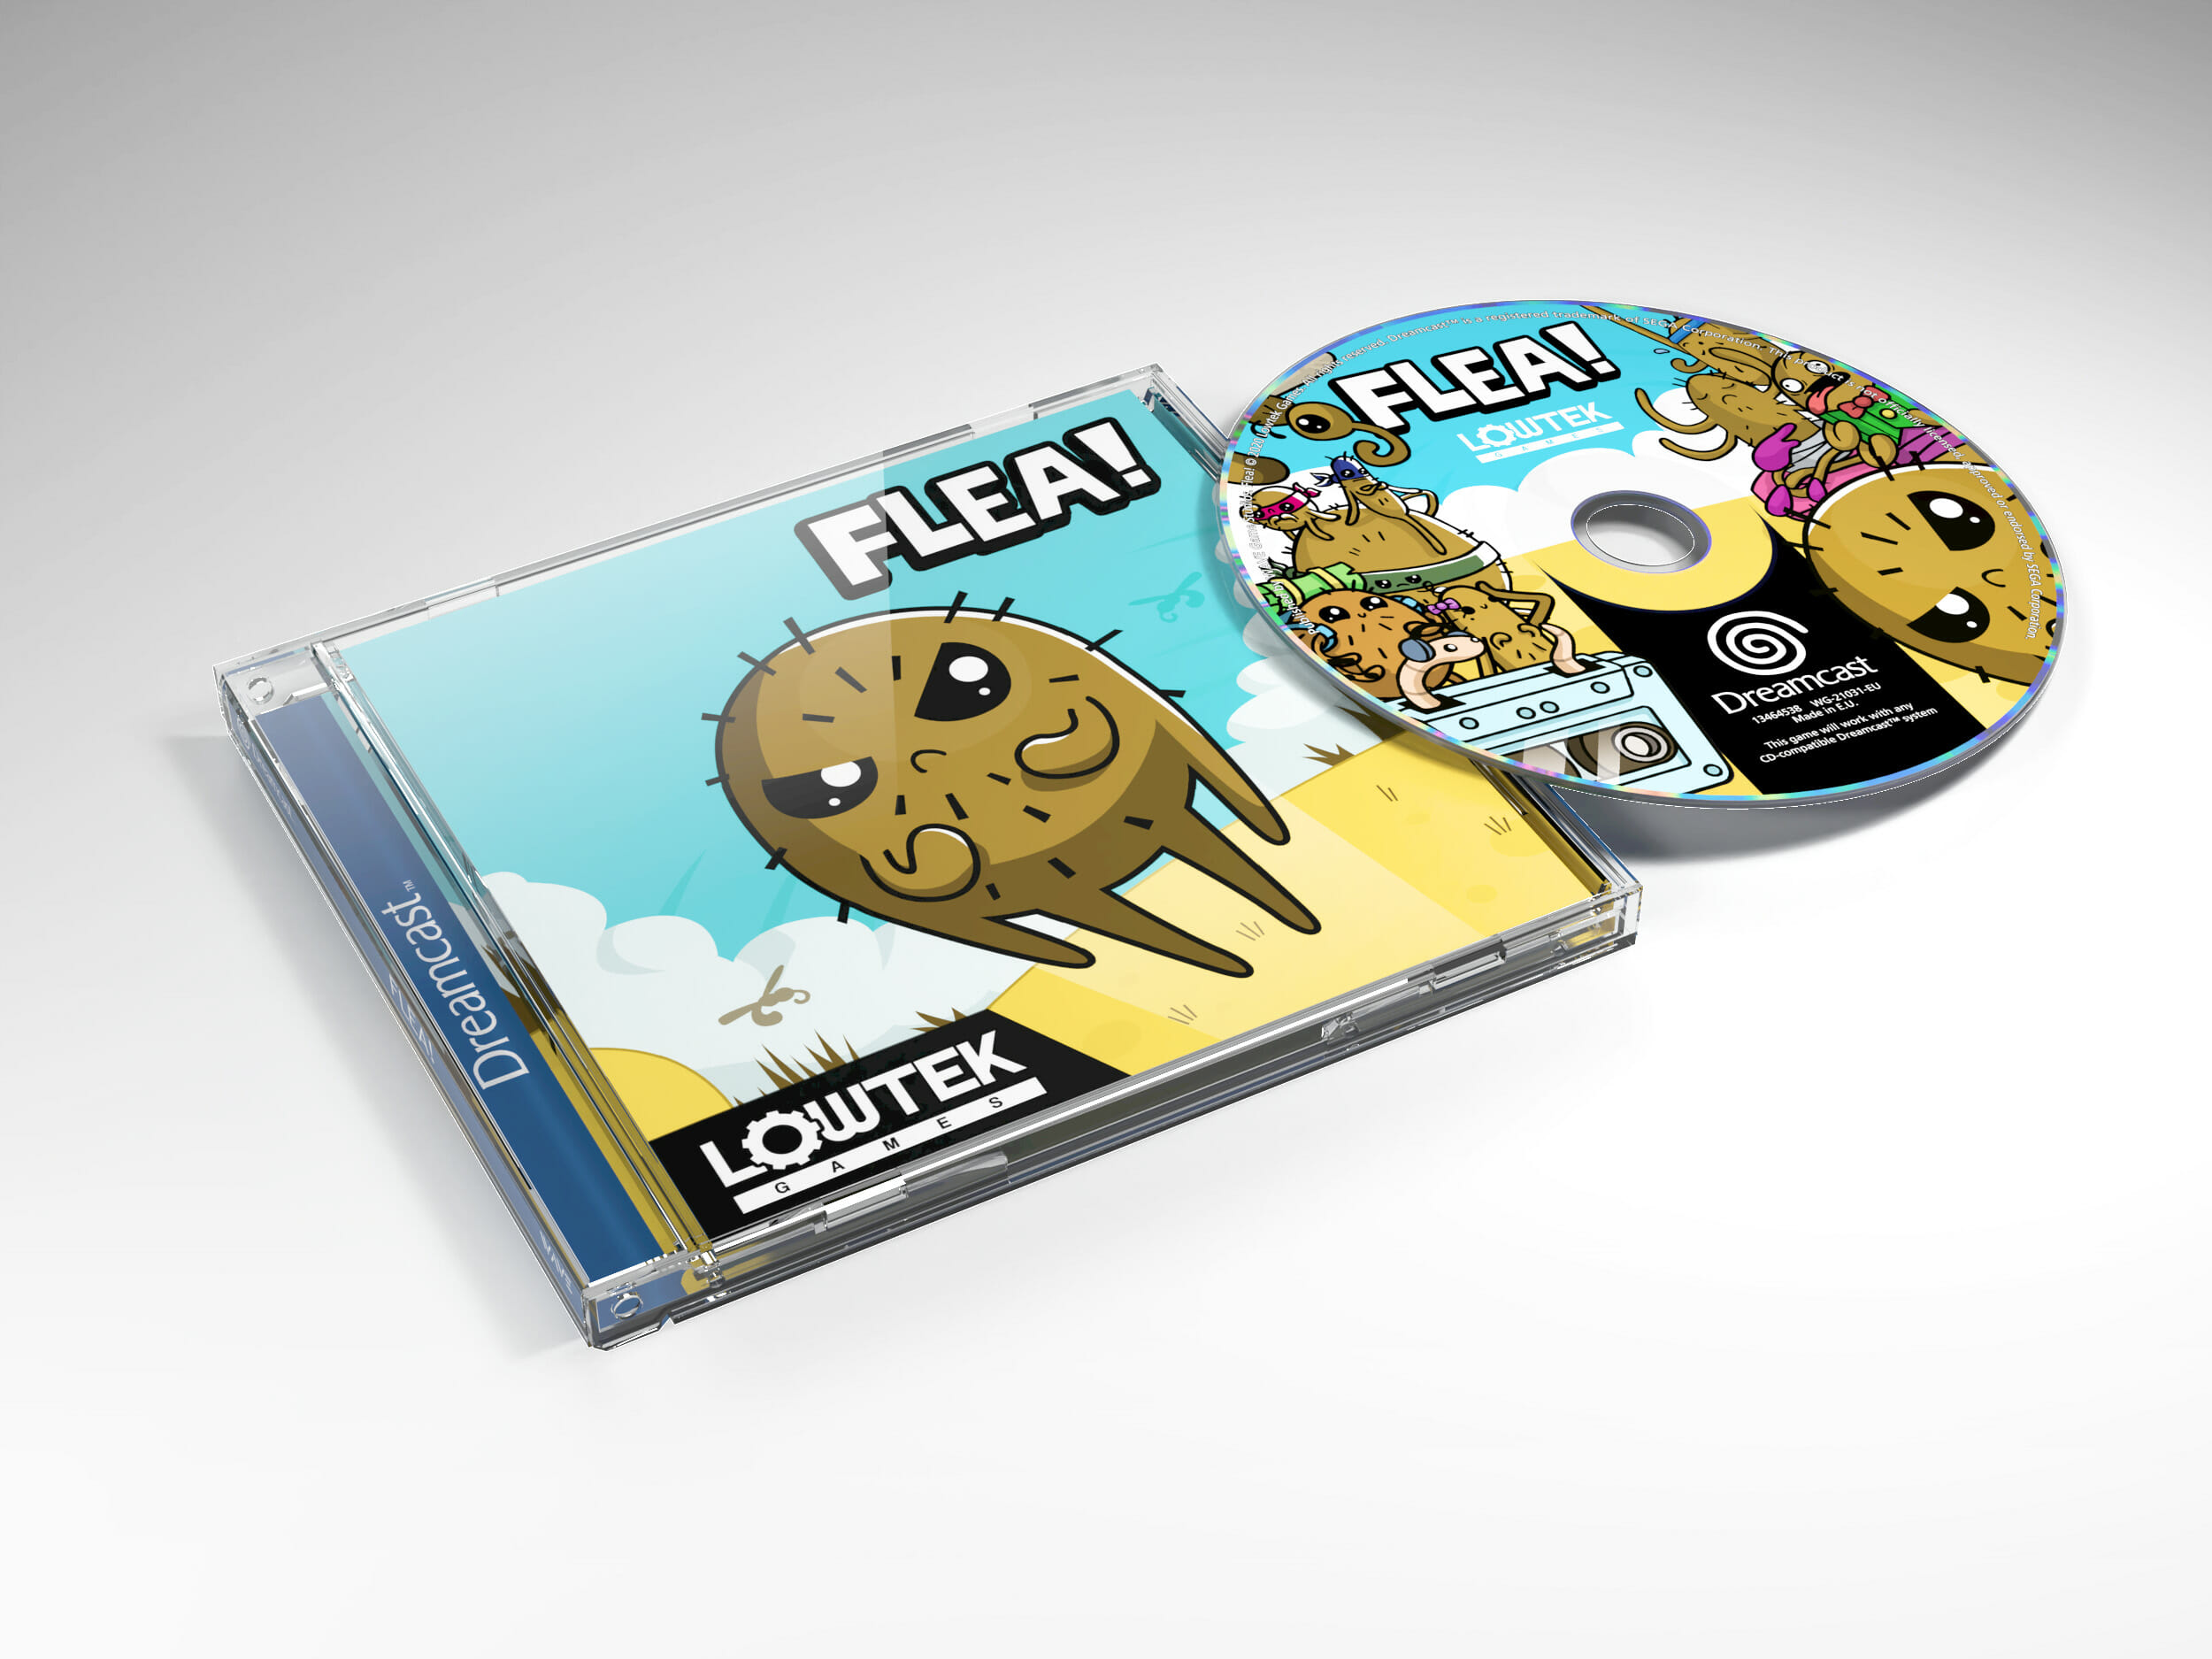 Flea! Jumping to a Dreamcast Near You